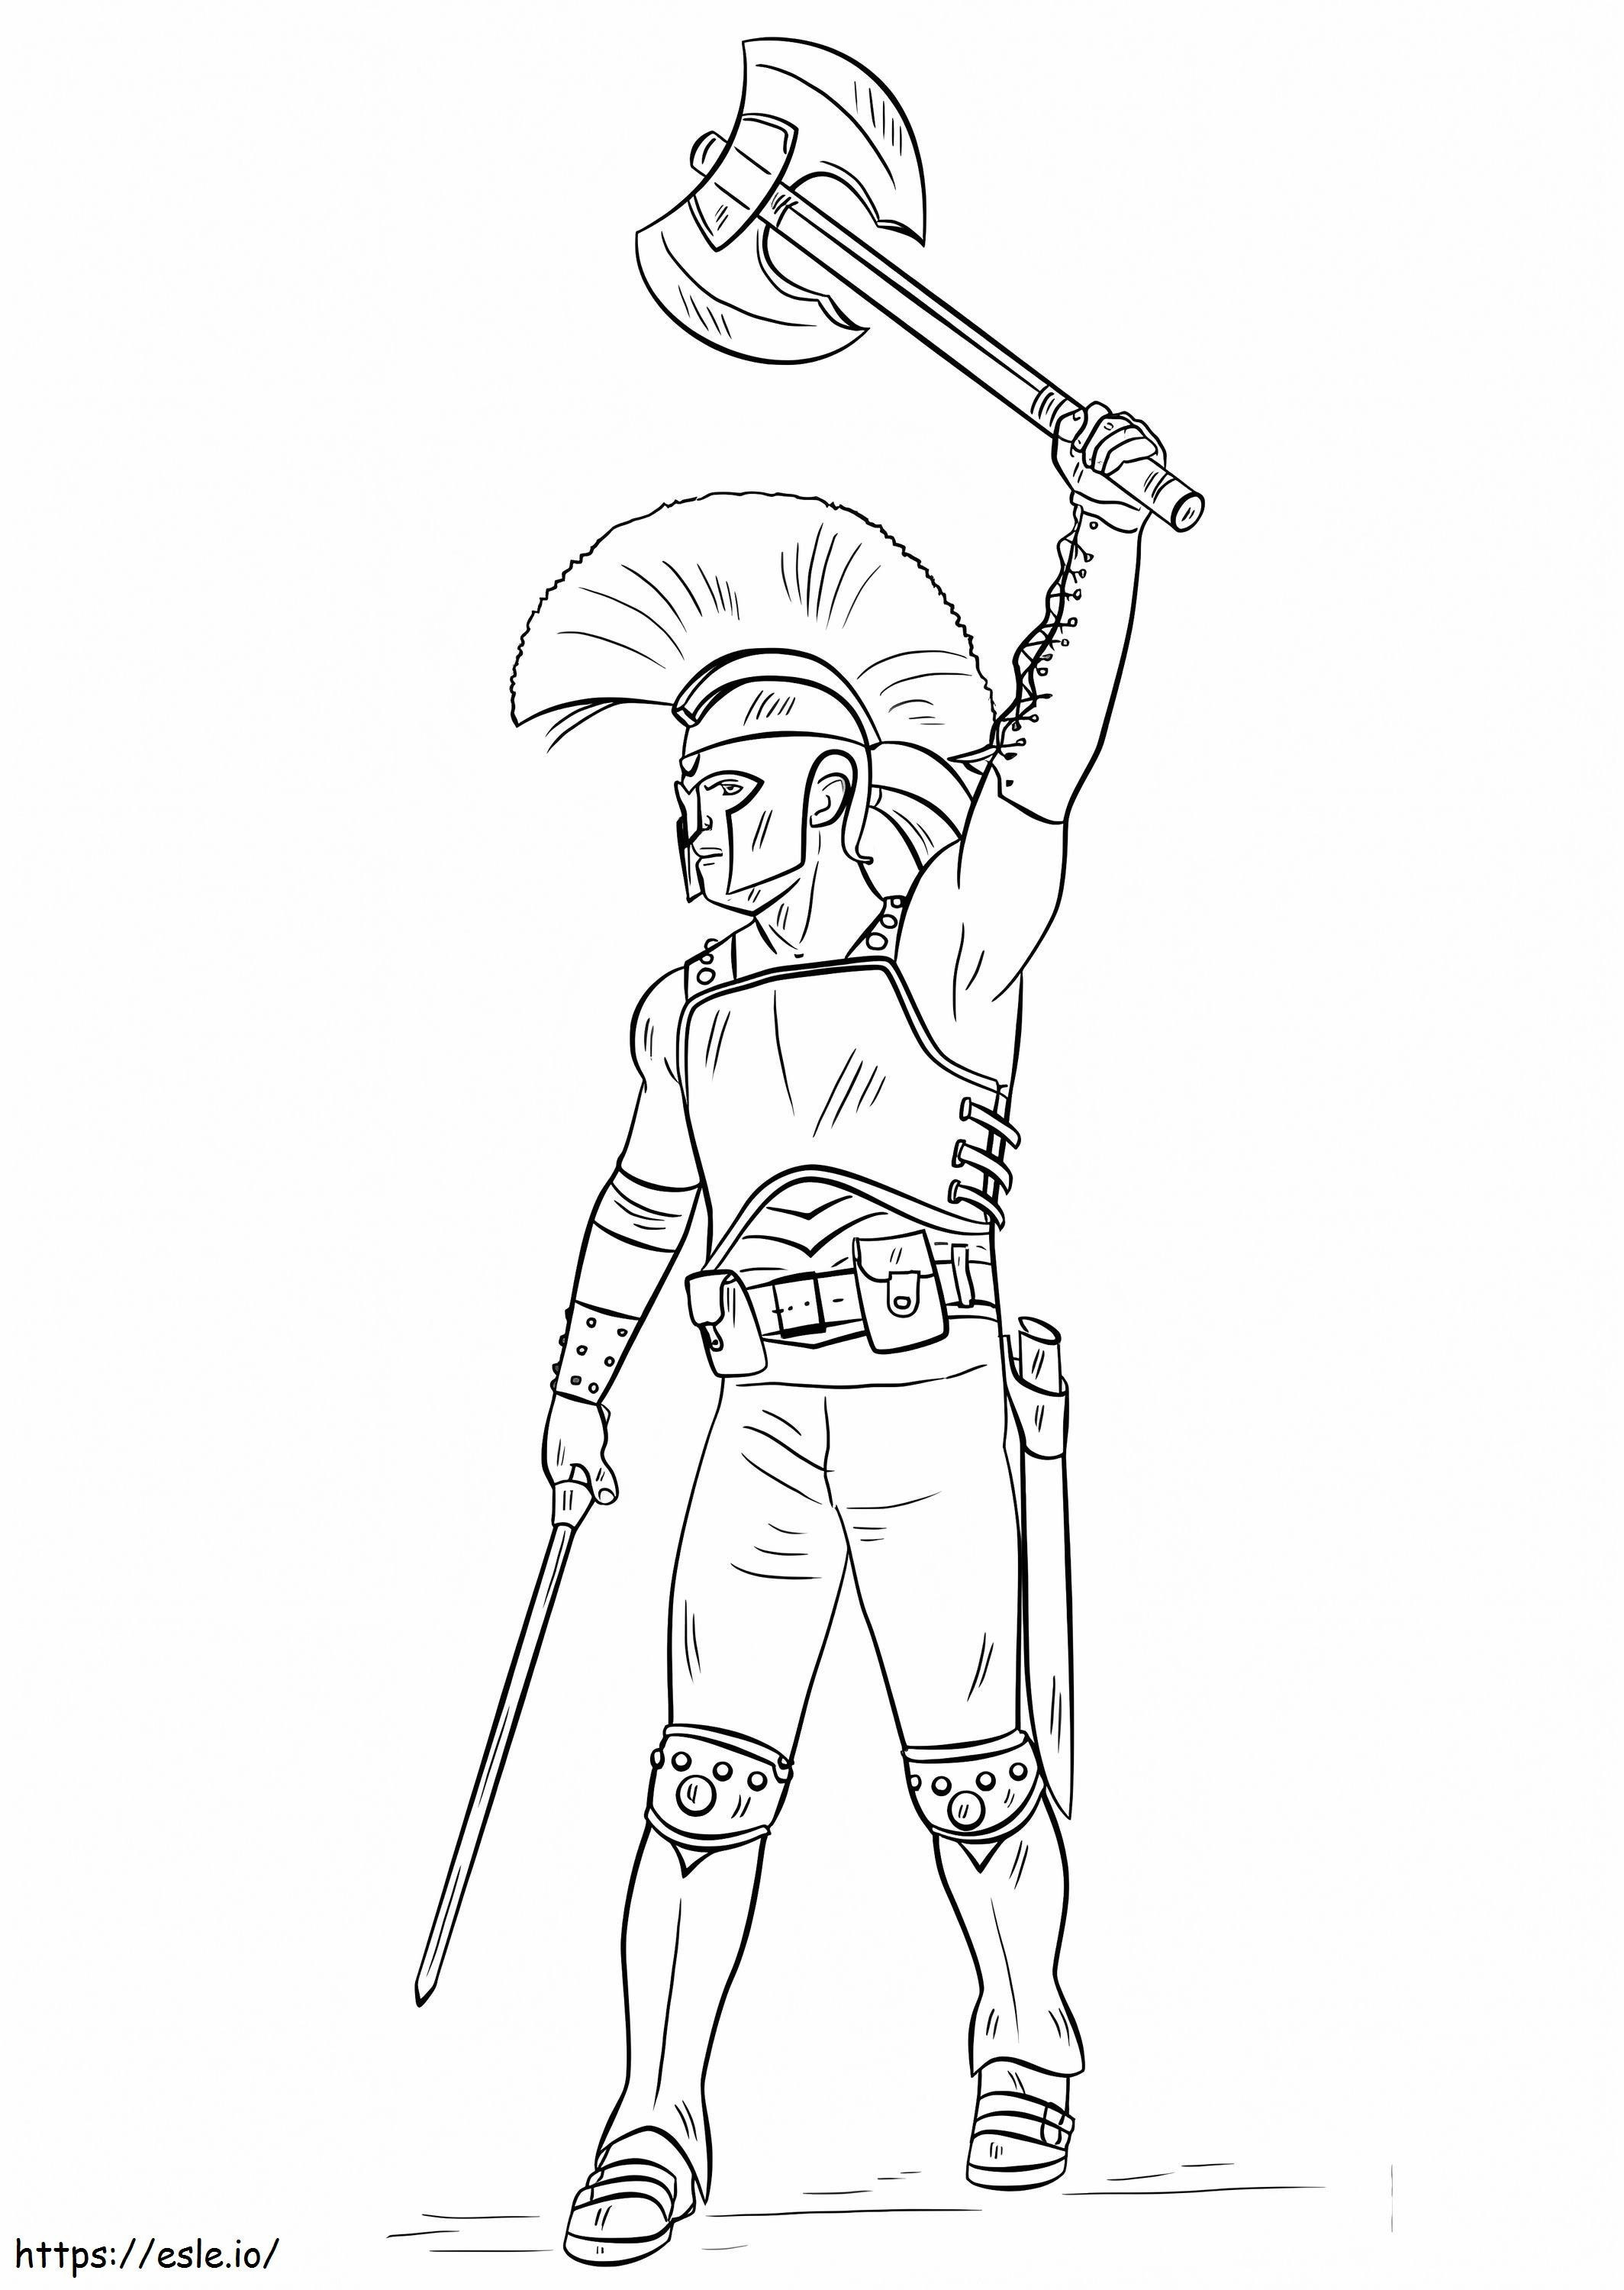 Gladiator coloring page